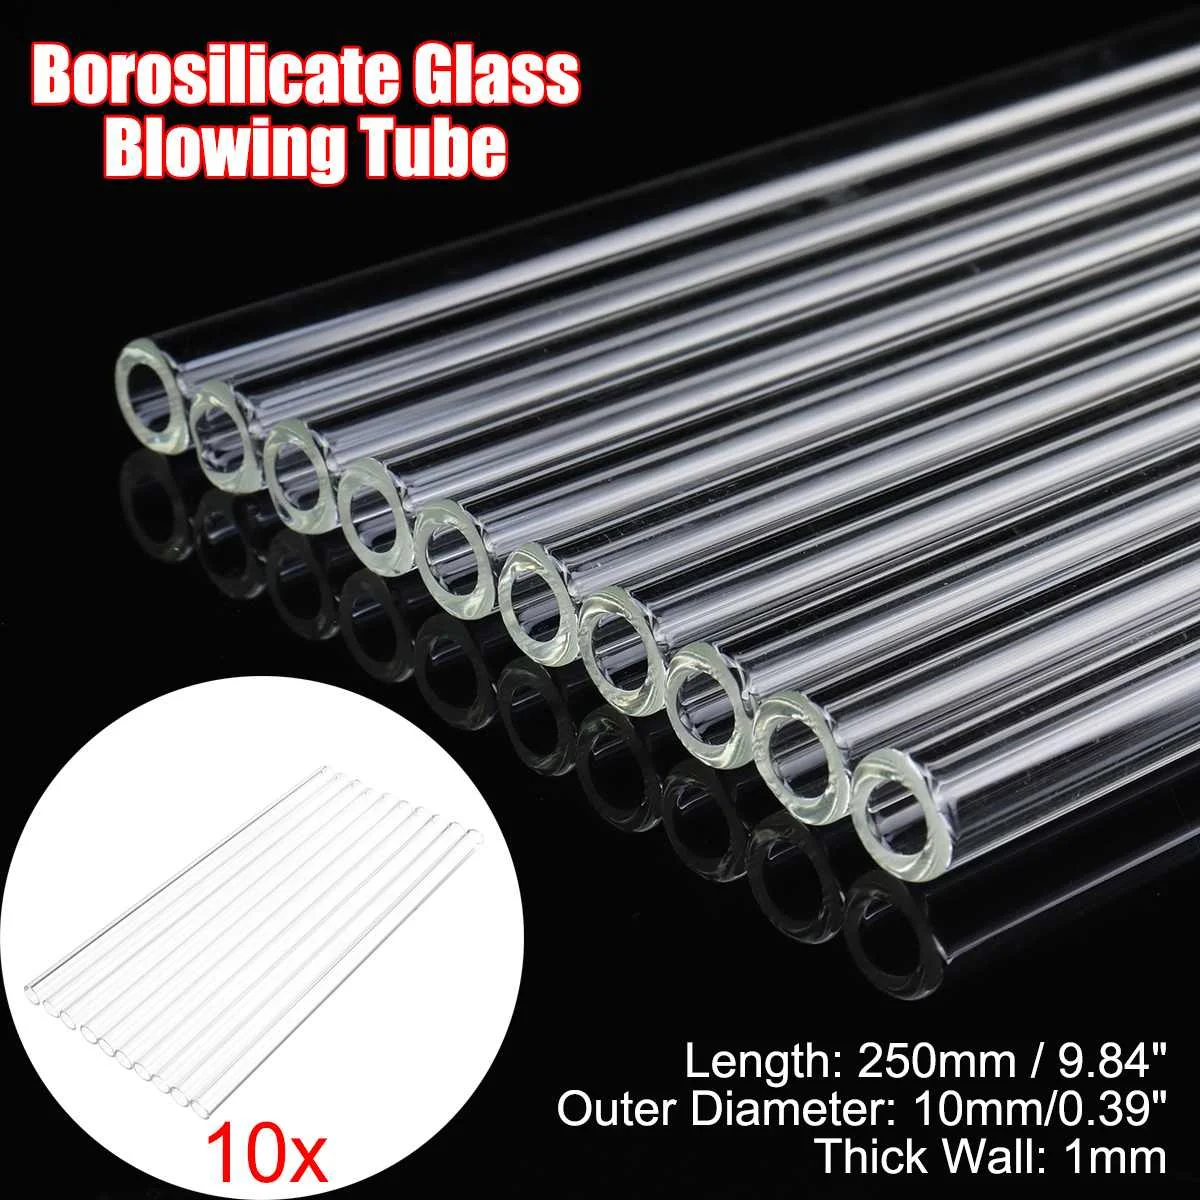 

10Pcs 250mm OD 10mm 1mm Thick Transparent Wall Borosilicate Glass Blowing Tube Mixer Rod for School Lab Chemical Experiment